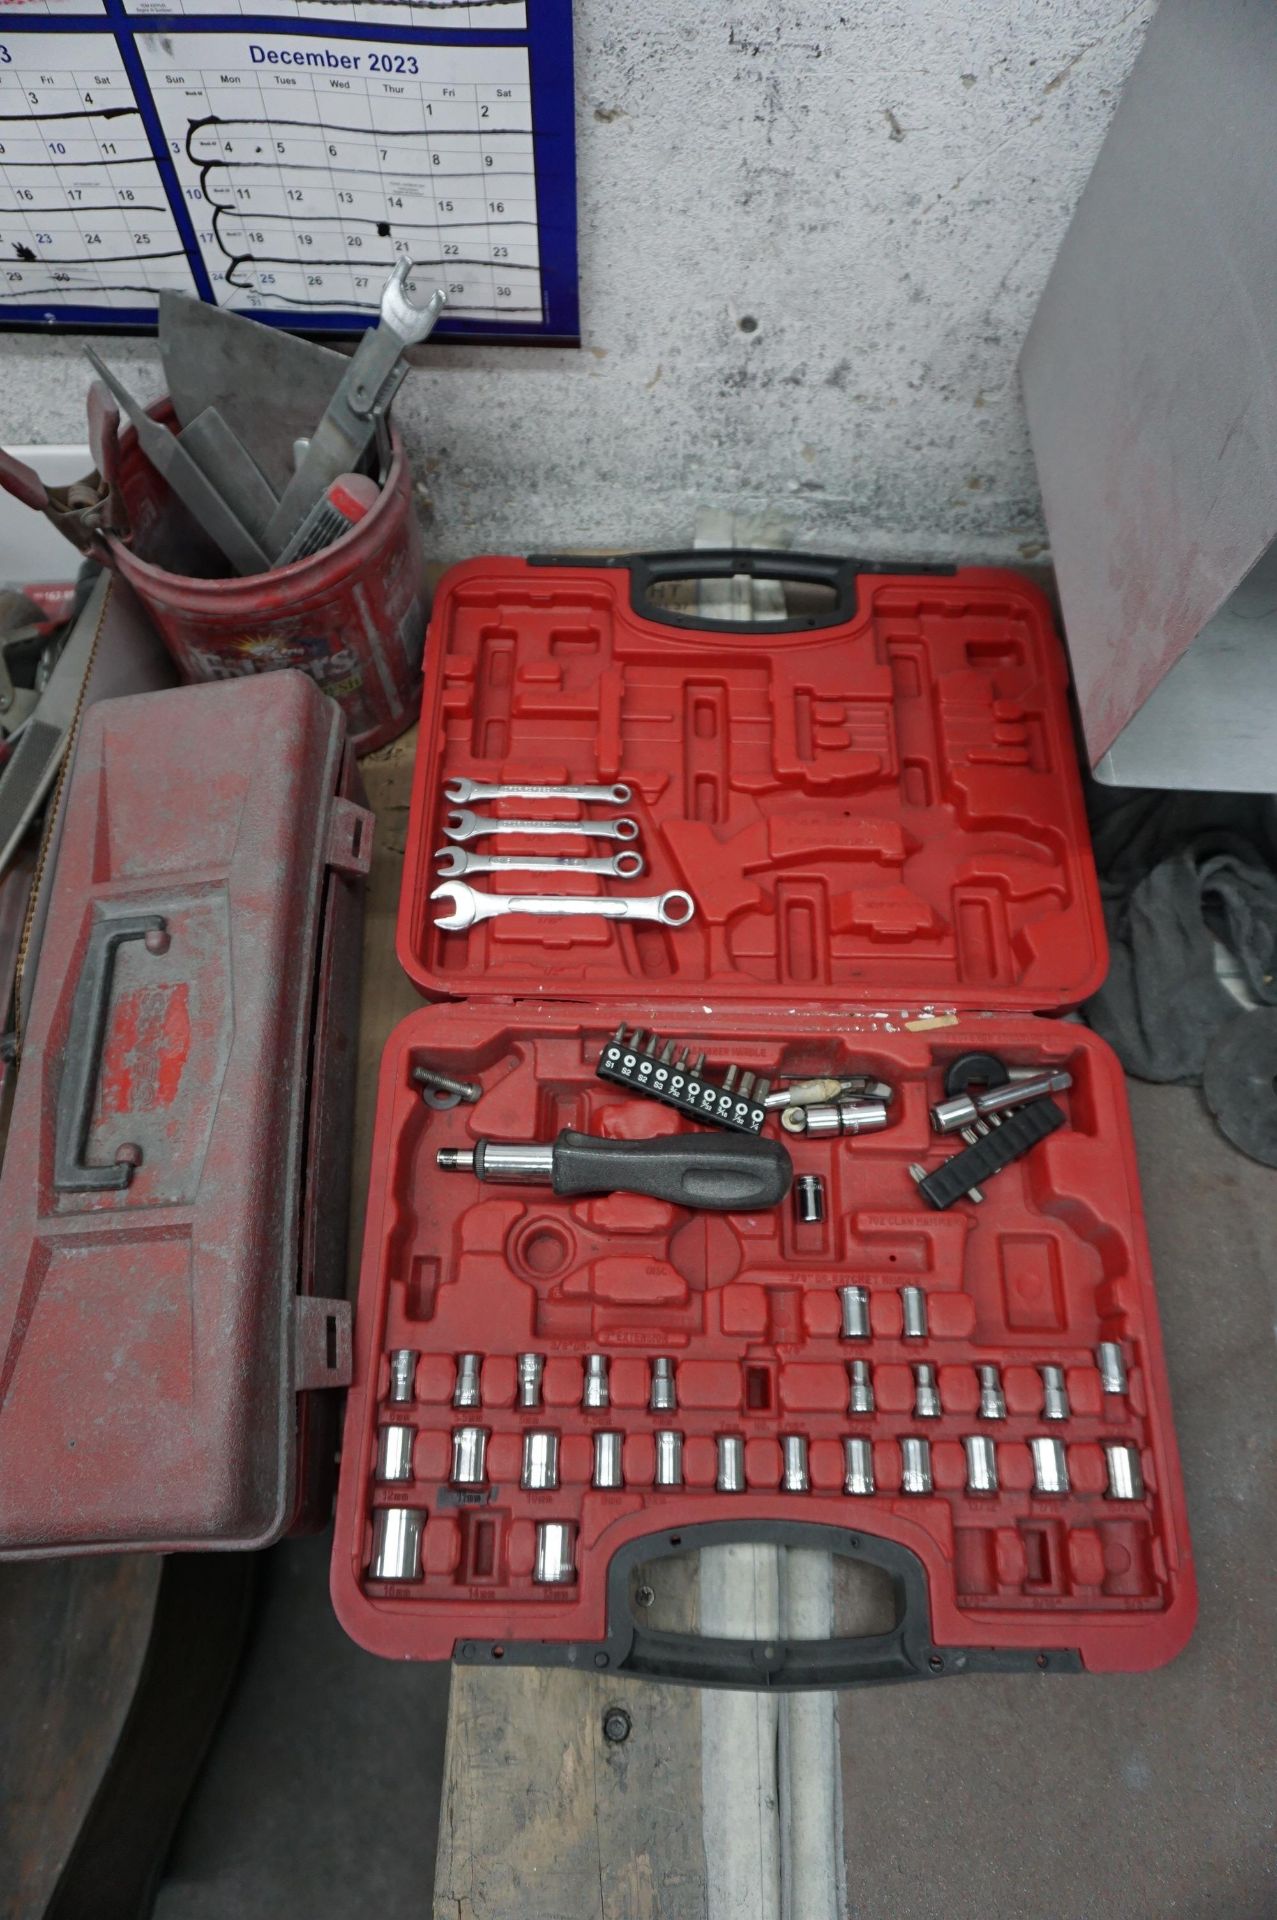 HAND TOOL LOT TO INCLUDE: MISC. FACE SHIELDS, SOCKETS, WRENCHES, PLIERS, FILES, ALAN KEYS - Image 3 of 4